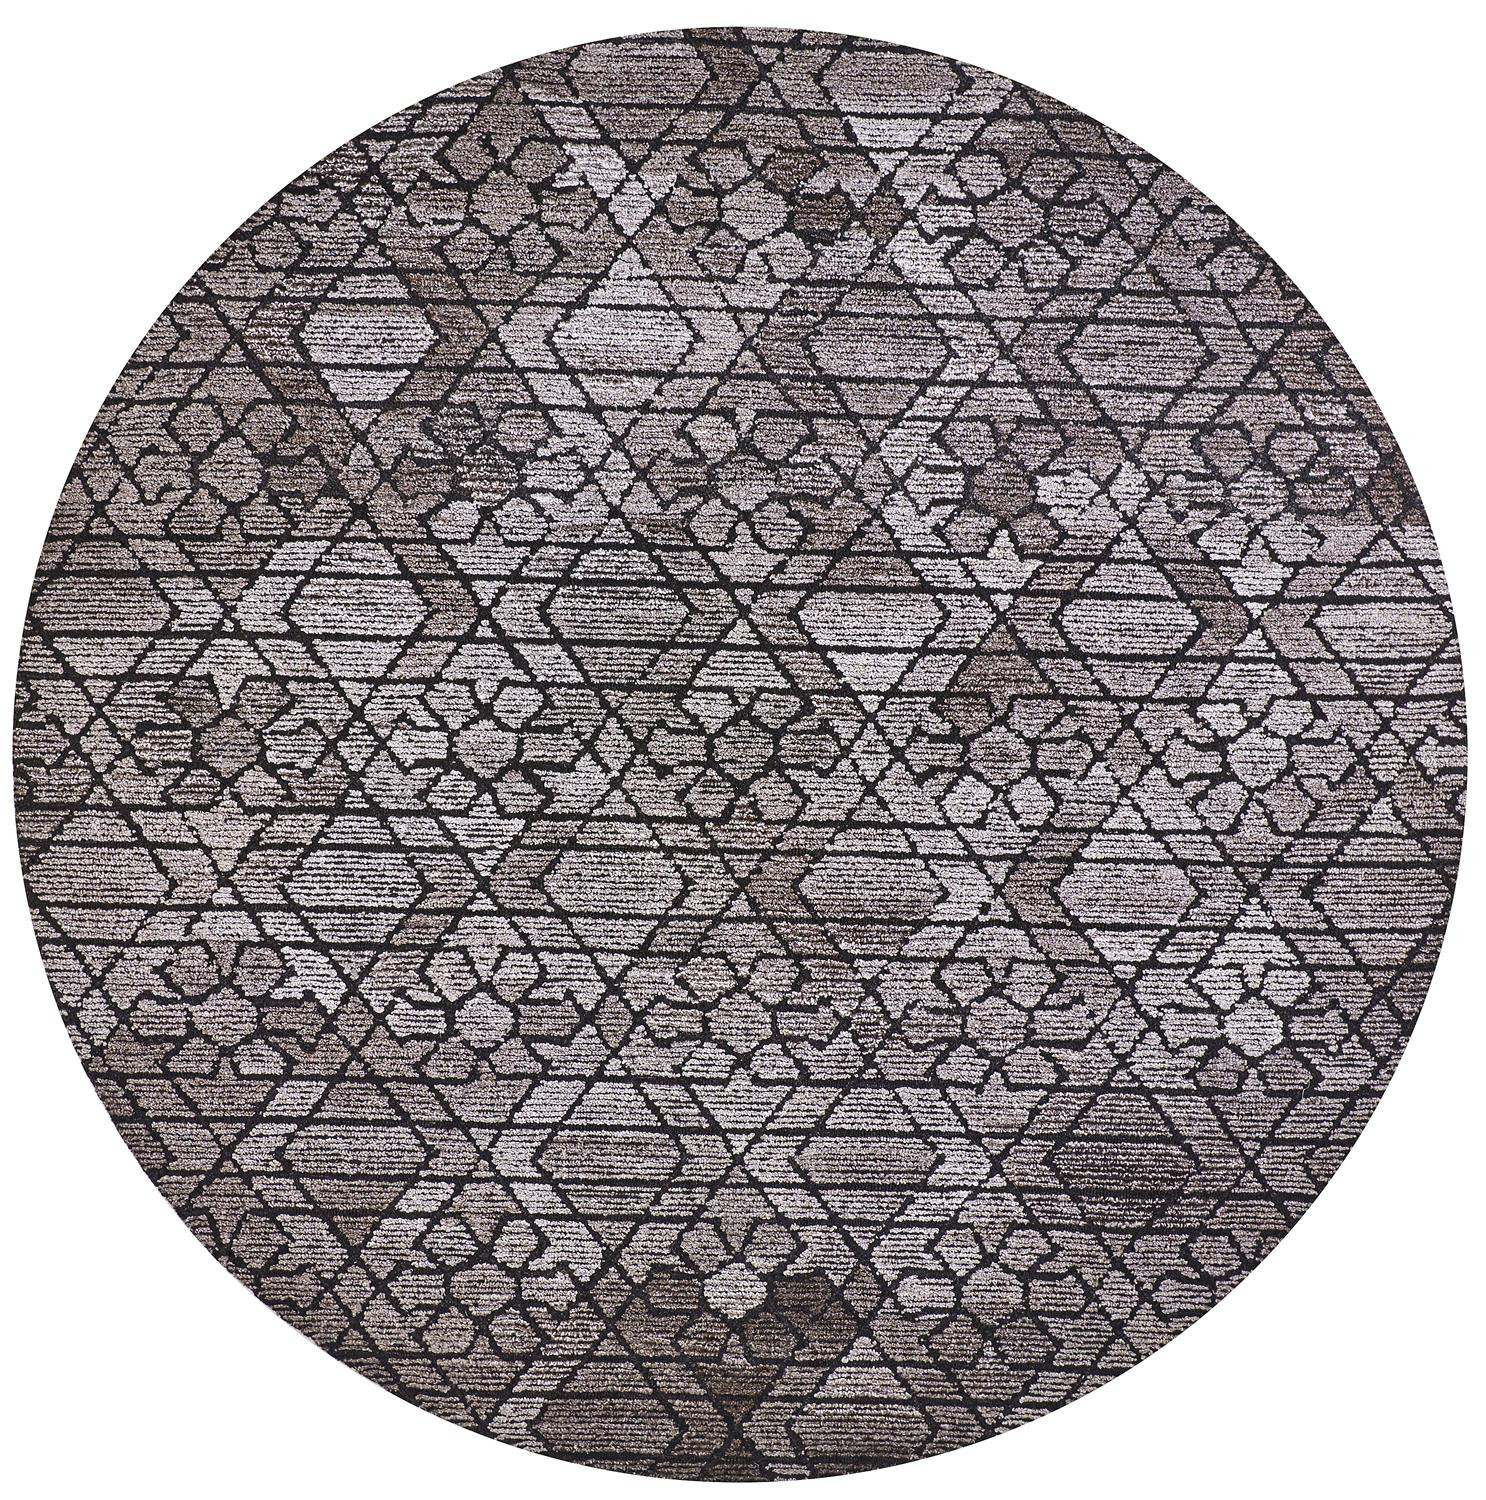 10' Taupe Black And Gray Round Wool Paisley Tufted Handmade Area Rug-512010-1